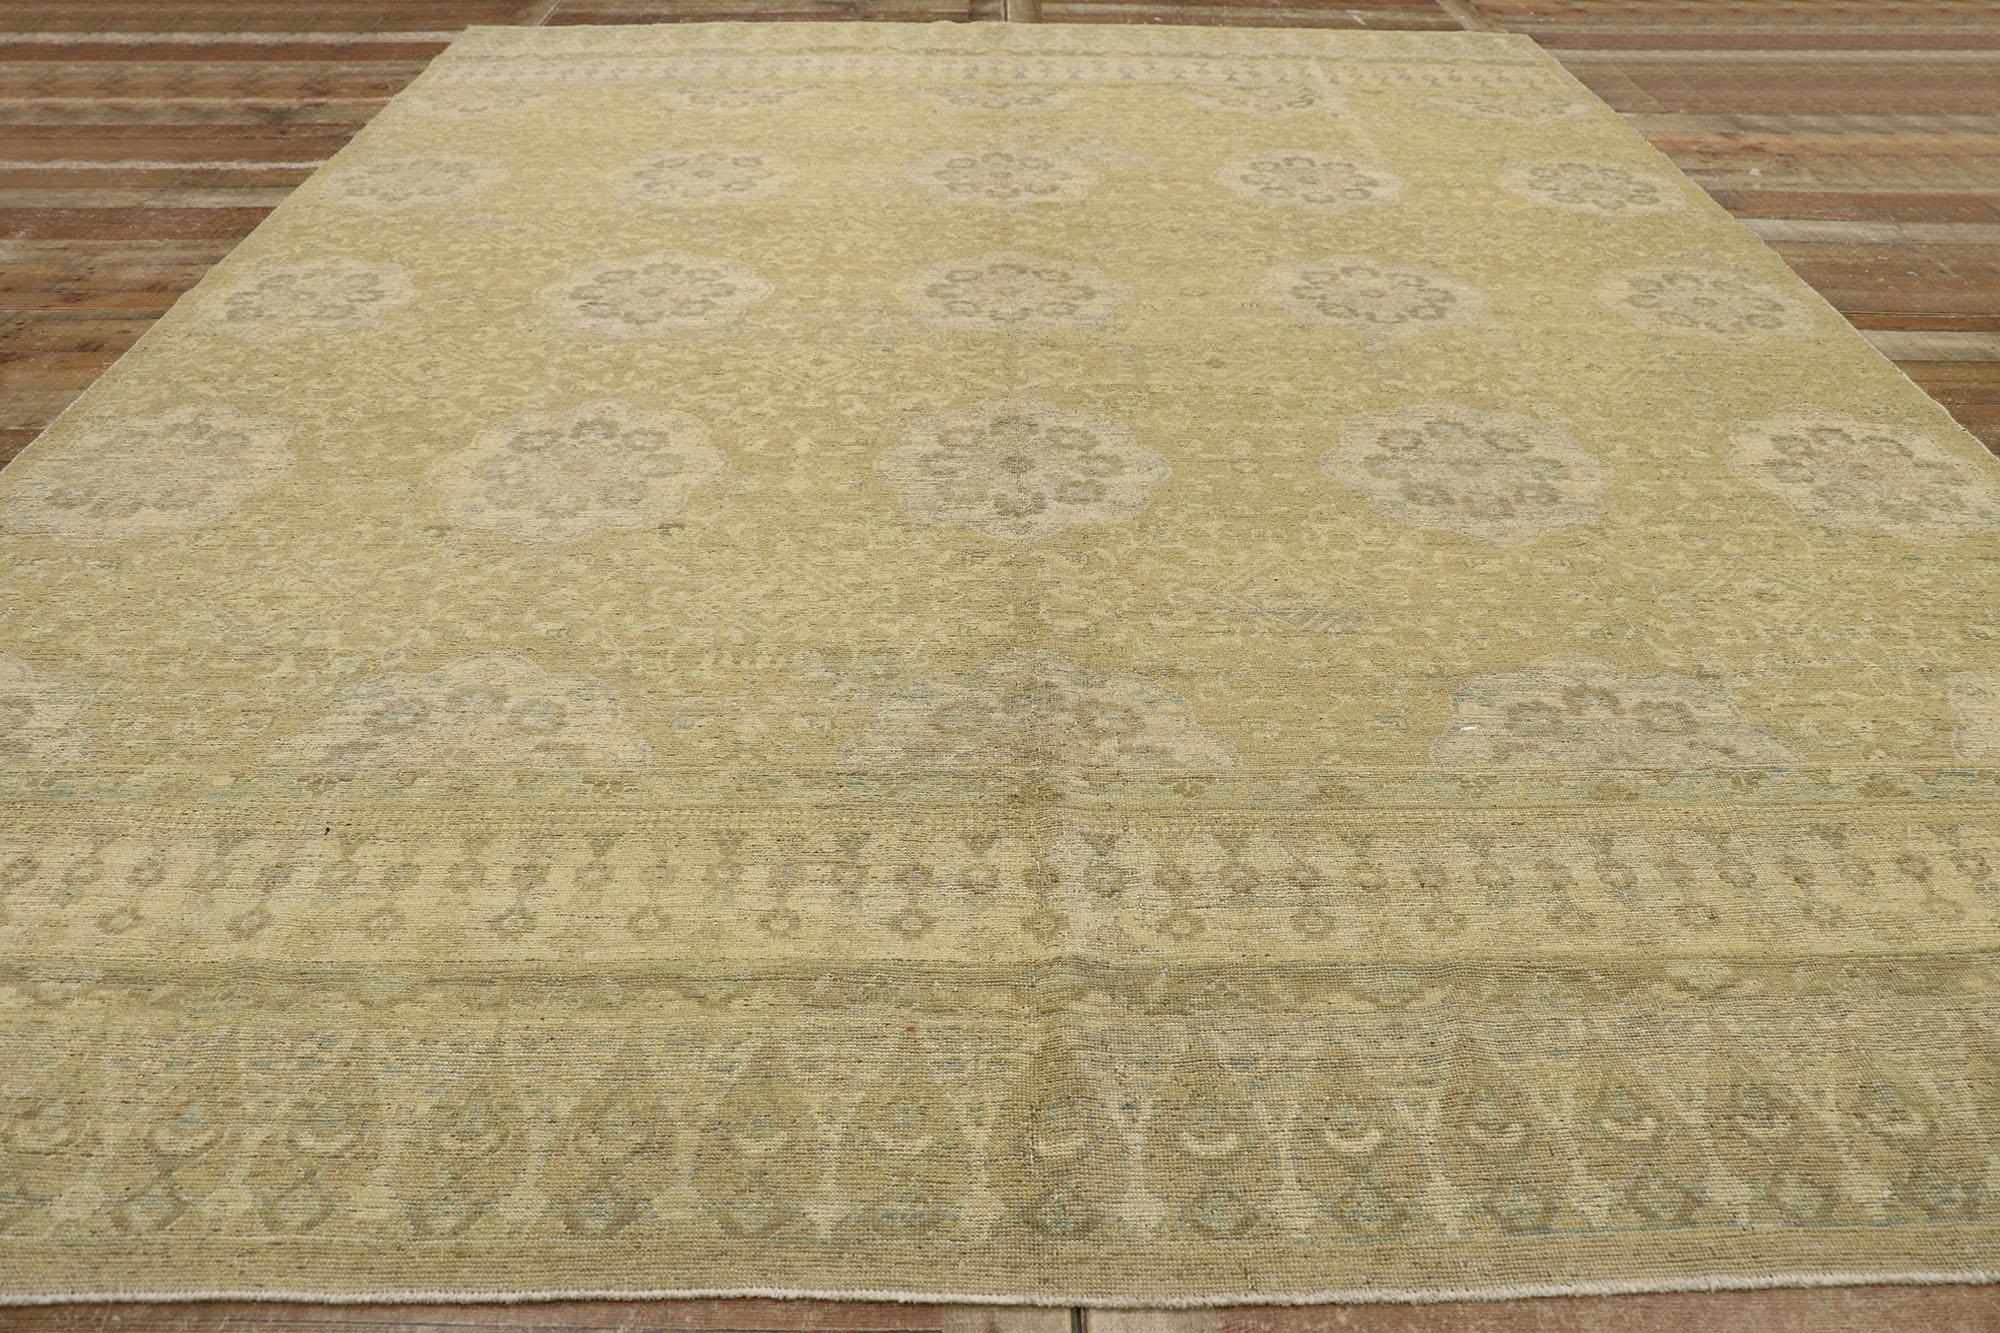 Wool Vintage Khotan Rug with European Style For Sale